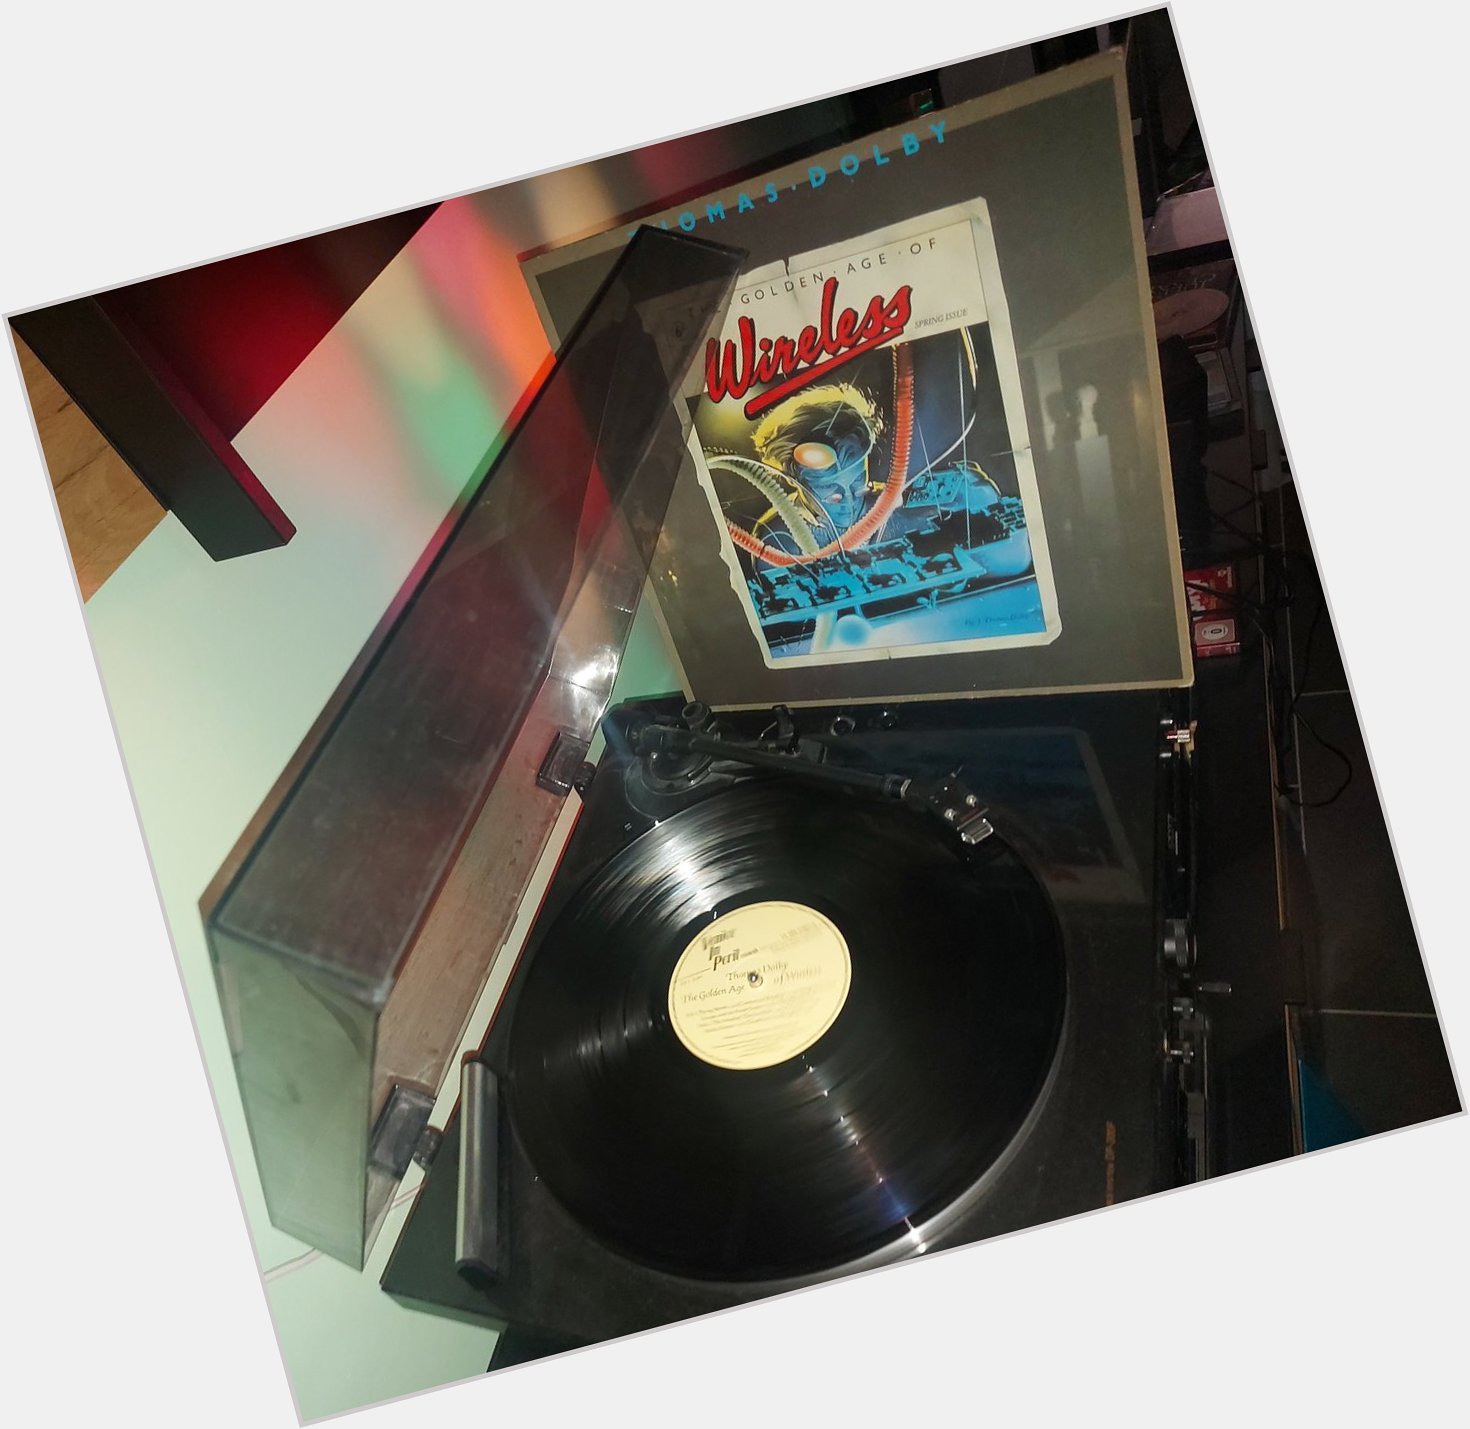 Happy Birthday Thomas Dolby *64*!
The Golden Age Of Wireless 
(Venice in Peril Records/EMI/1982)  